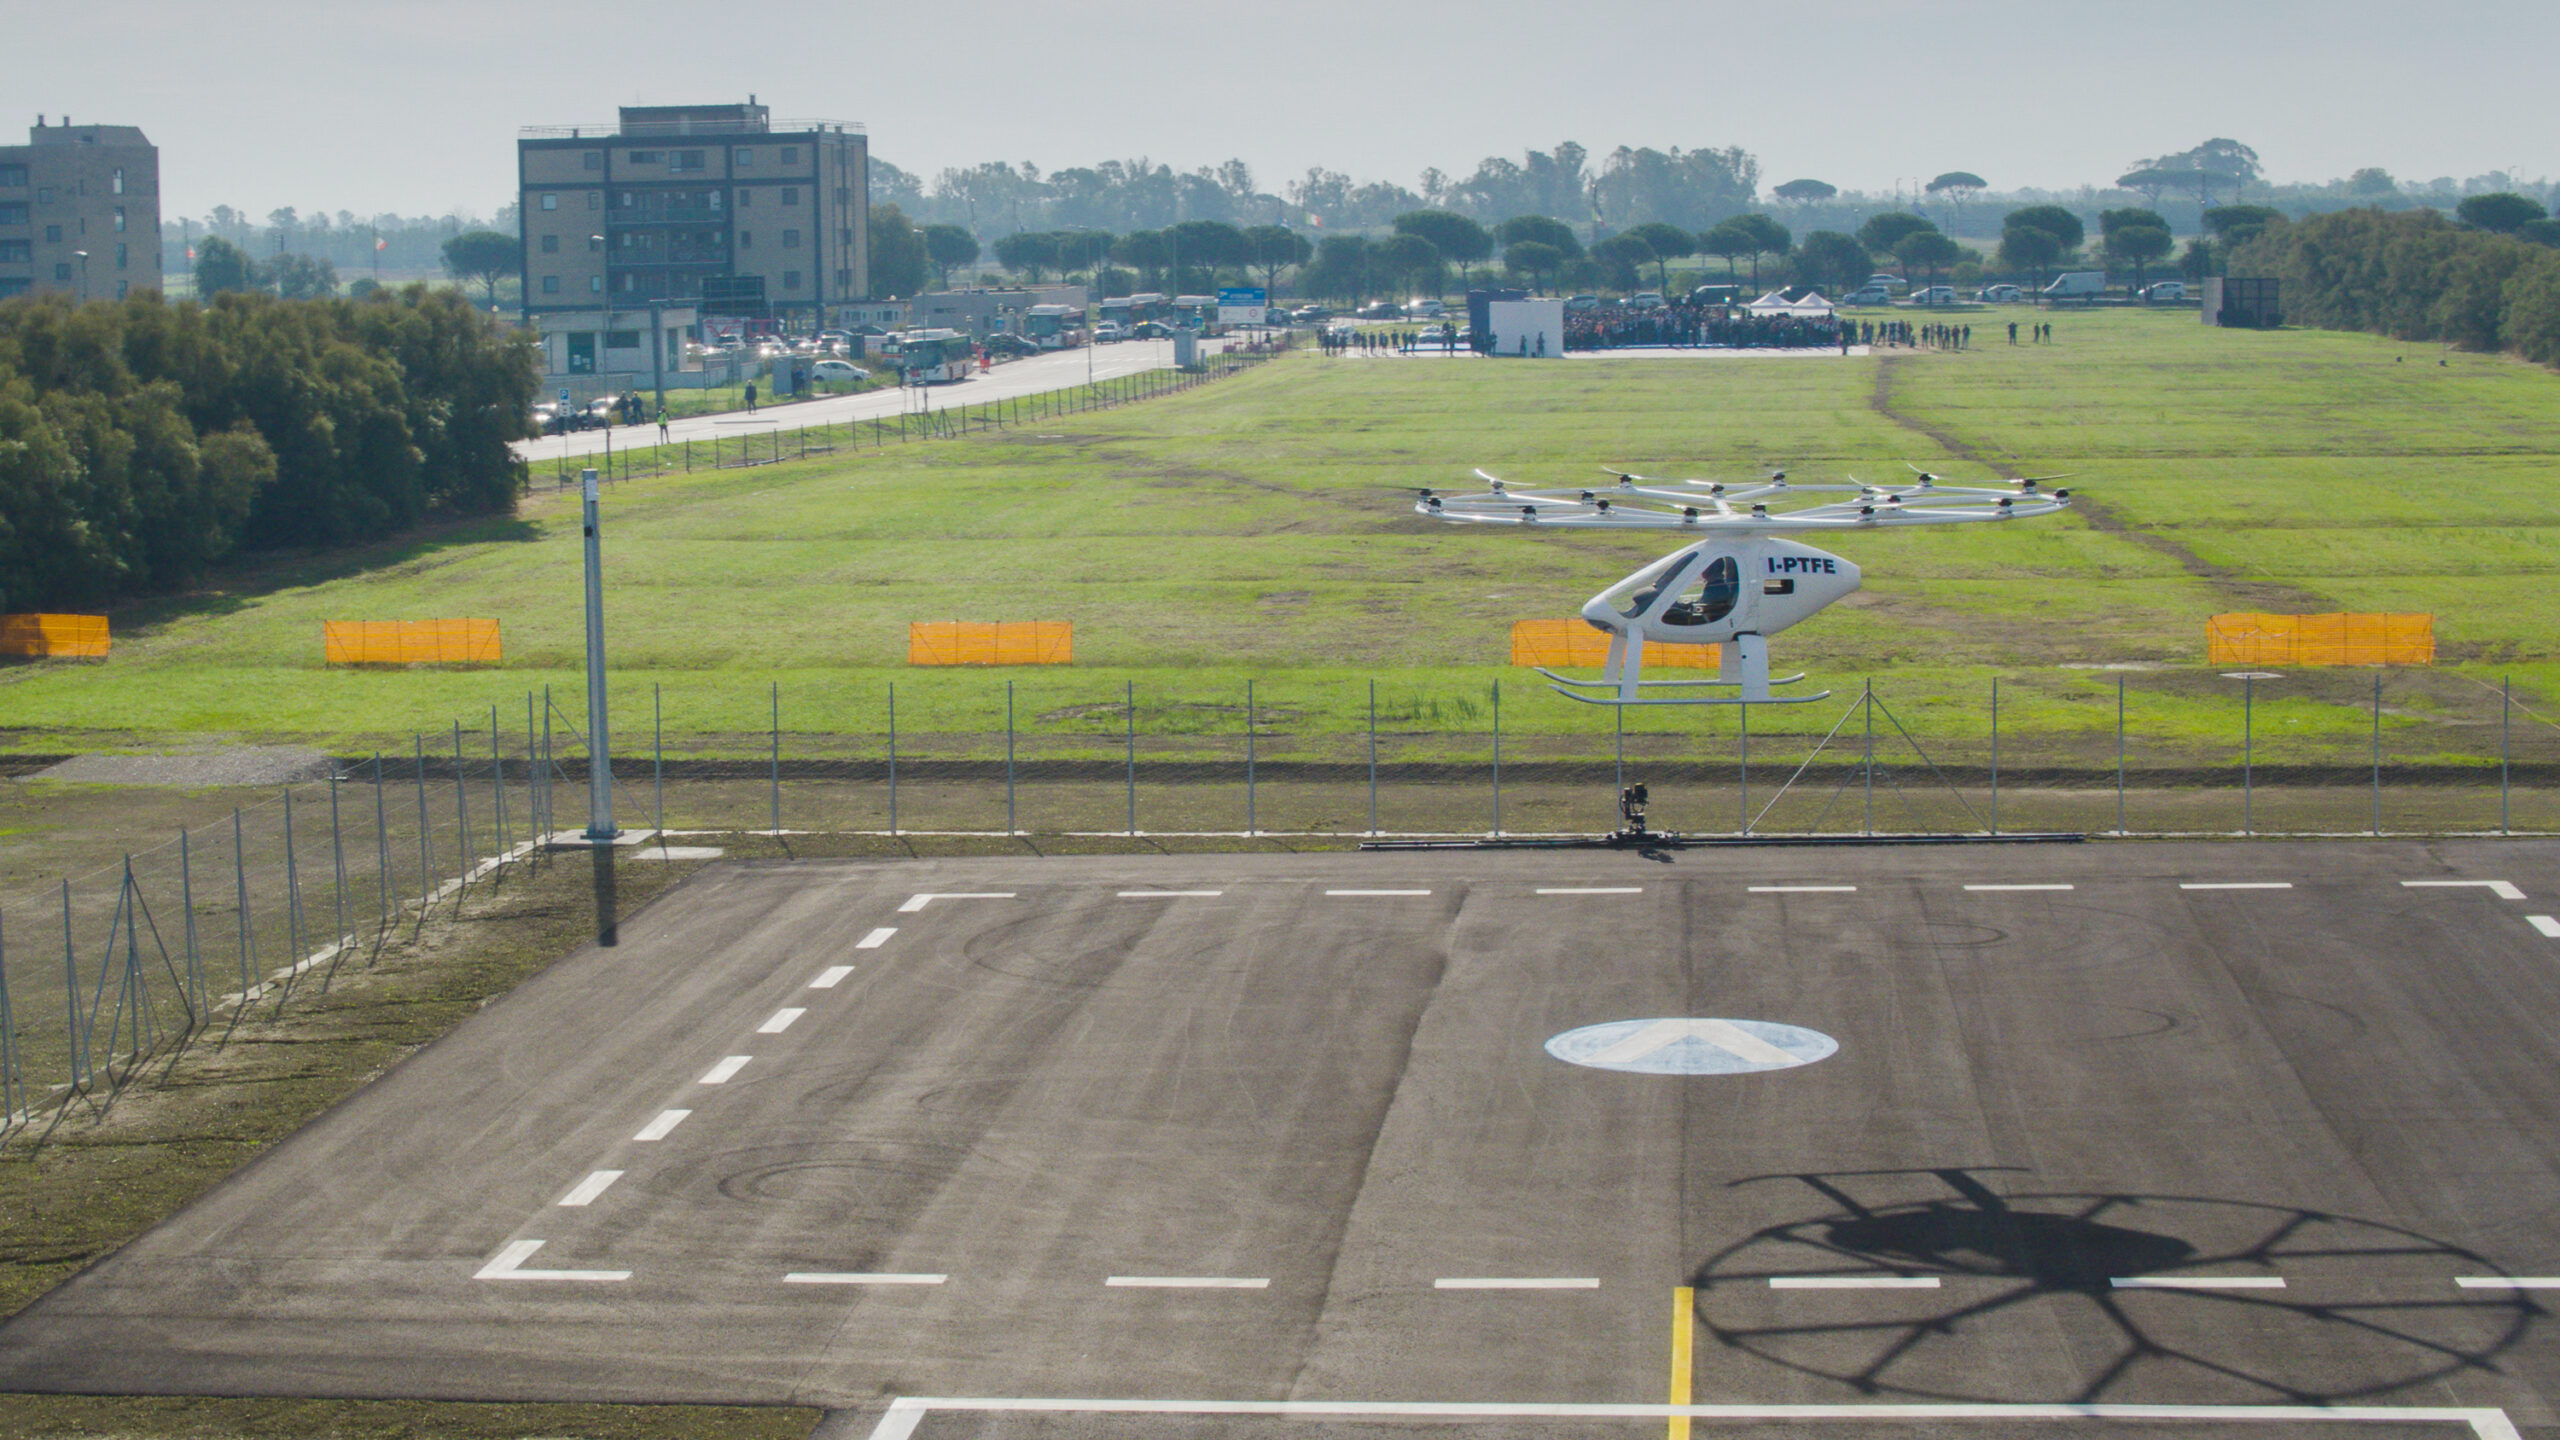 Fiumicino Airport marks milestone as home to Italy’s first vertiport